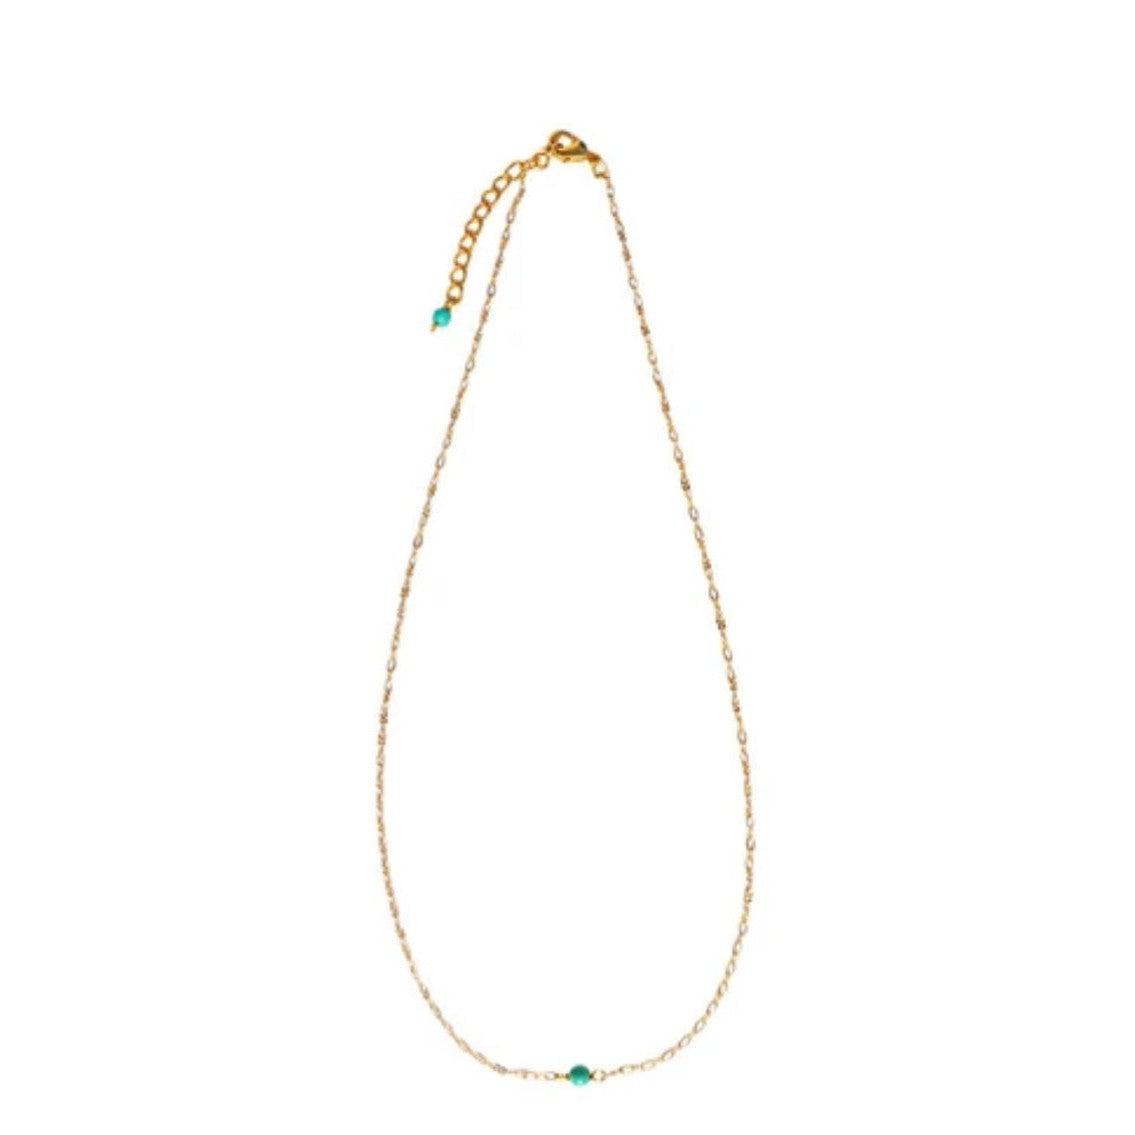 Tiny Turquoise Necklace